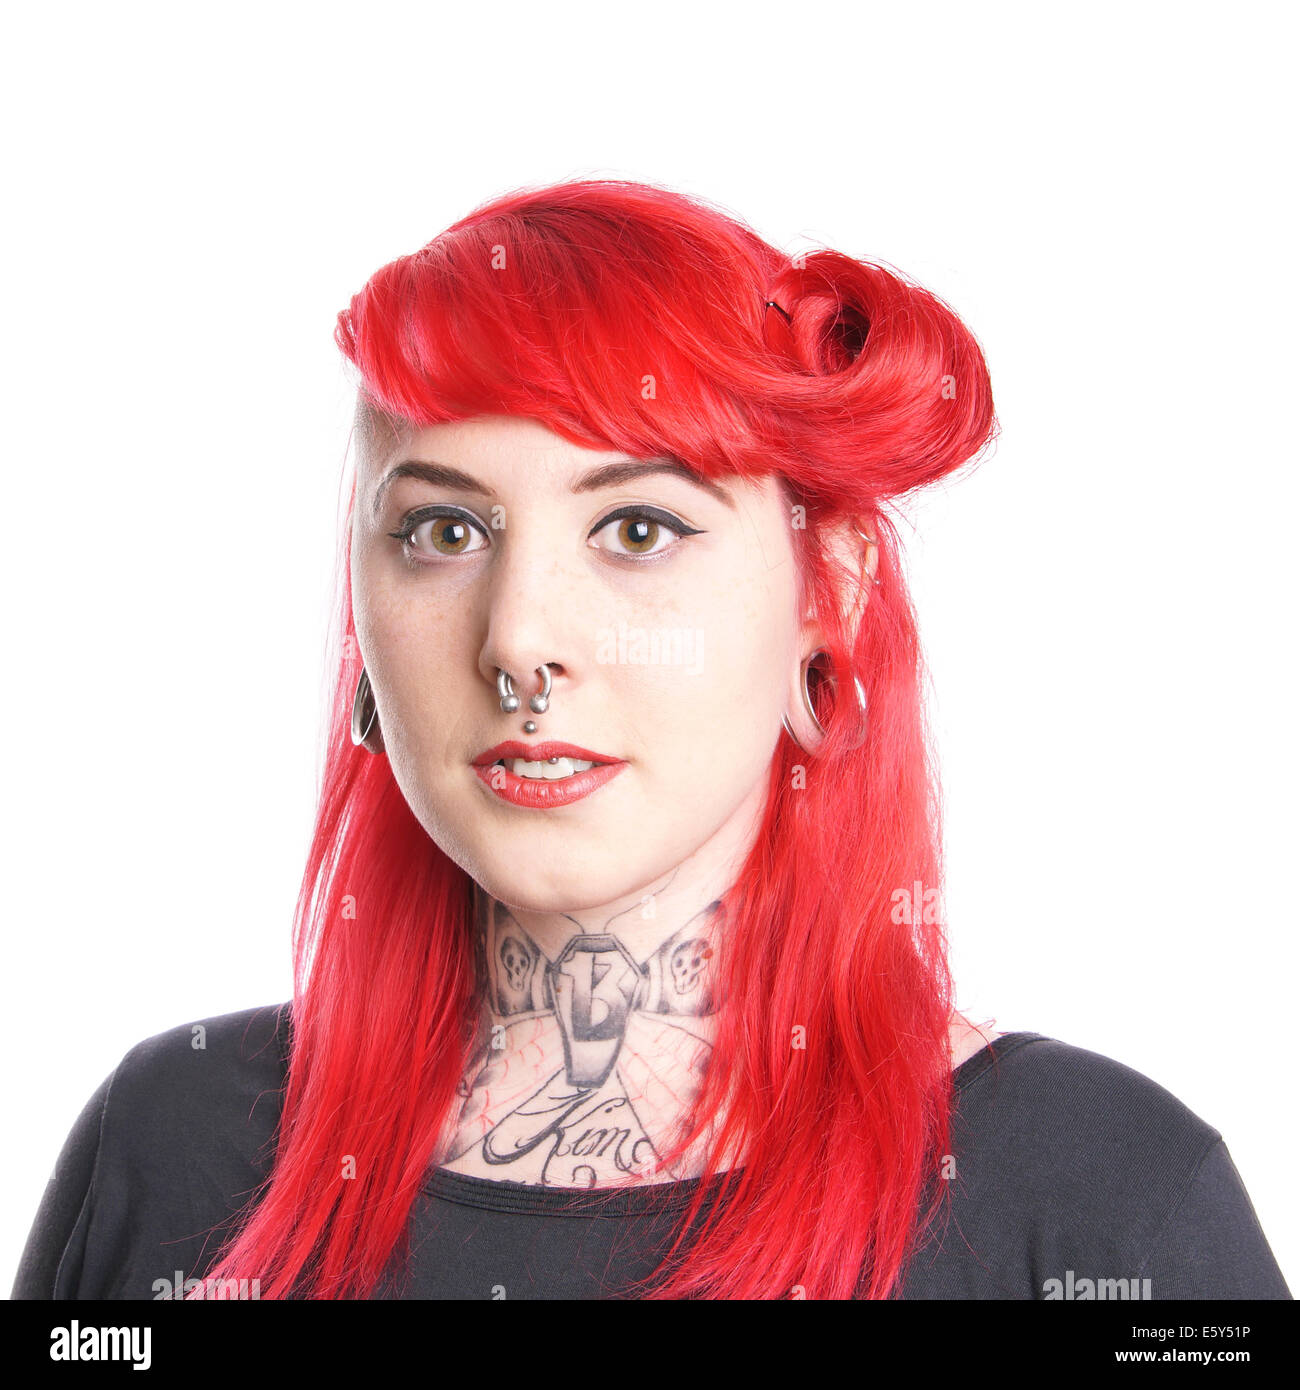 young woman with piercings and tattoos Stock Photo